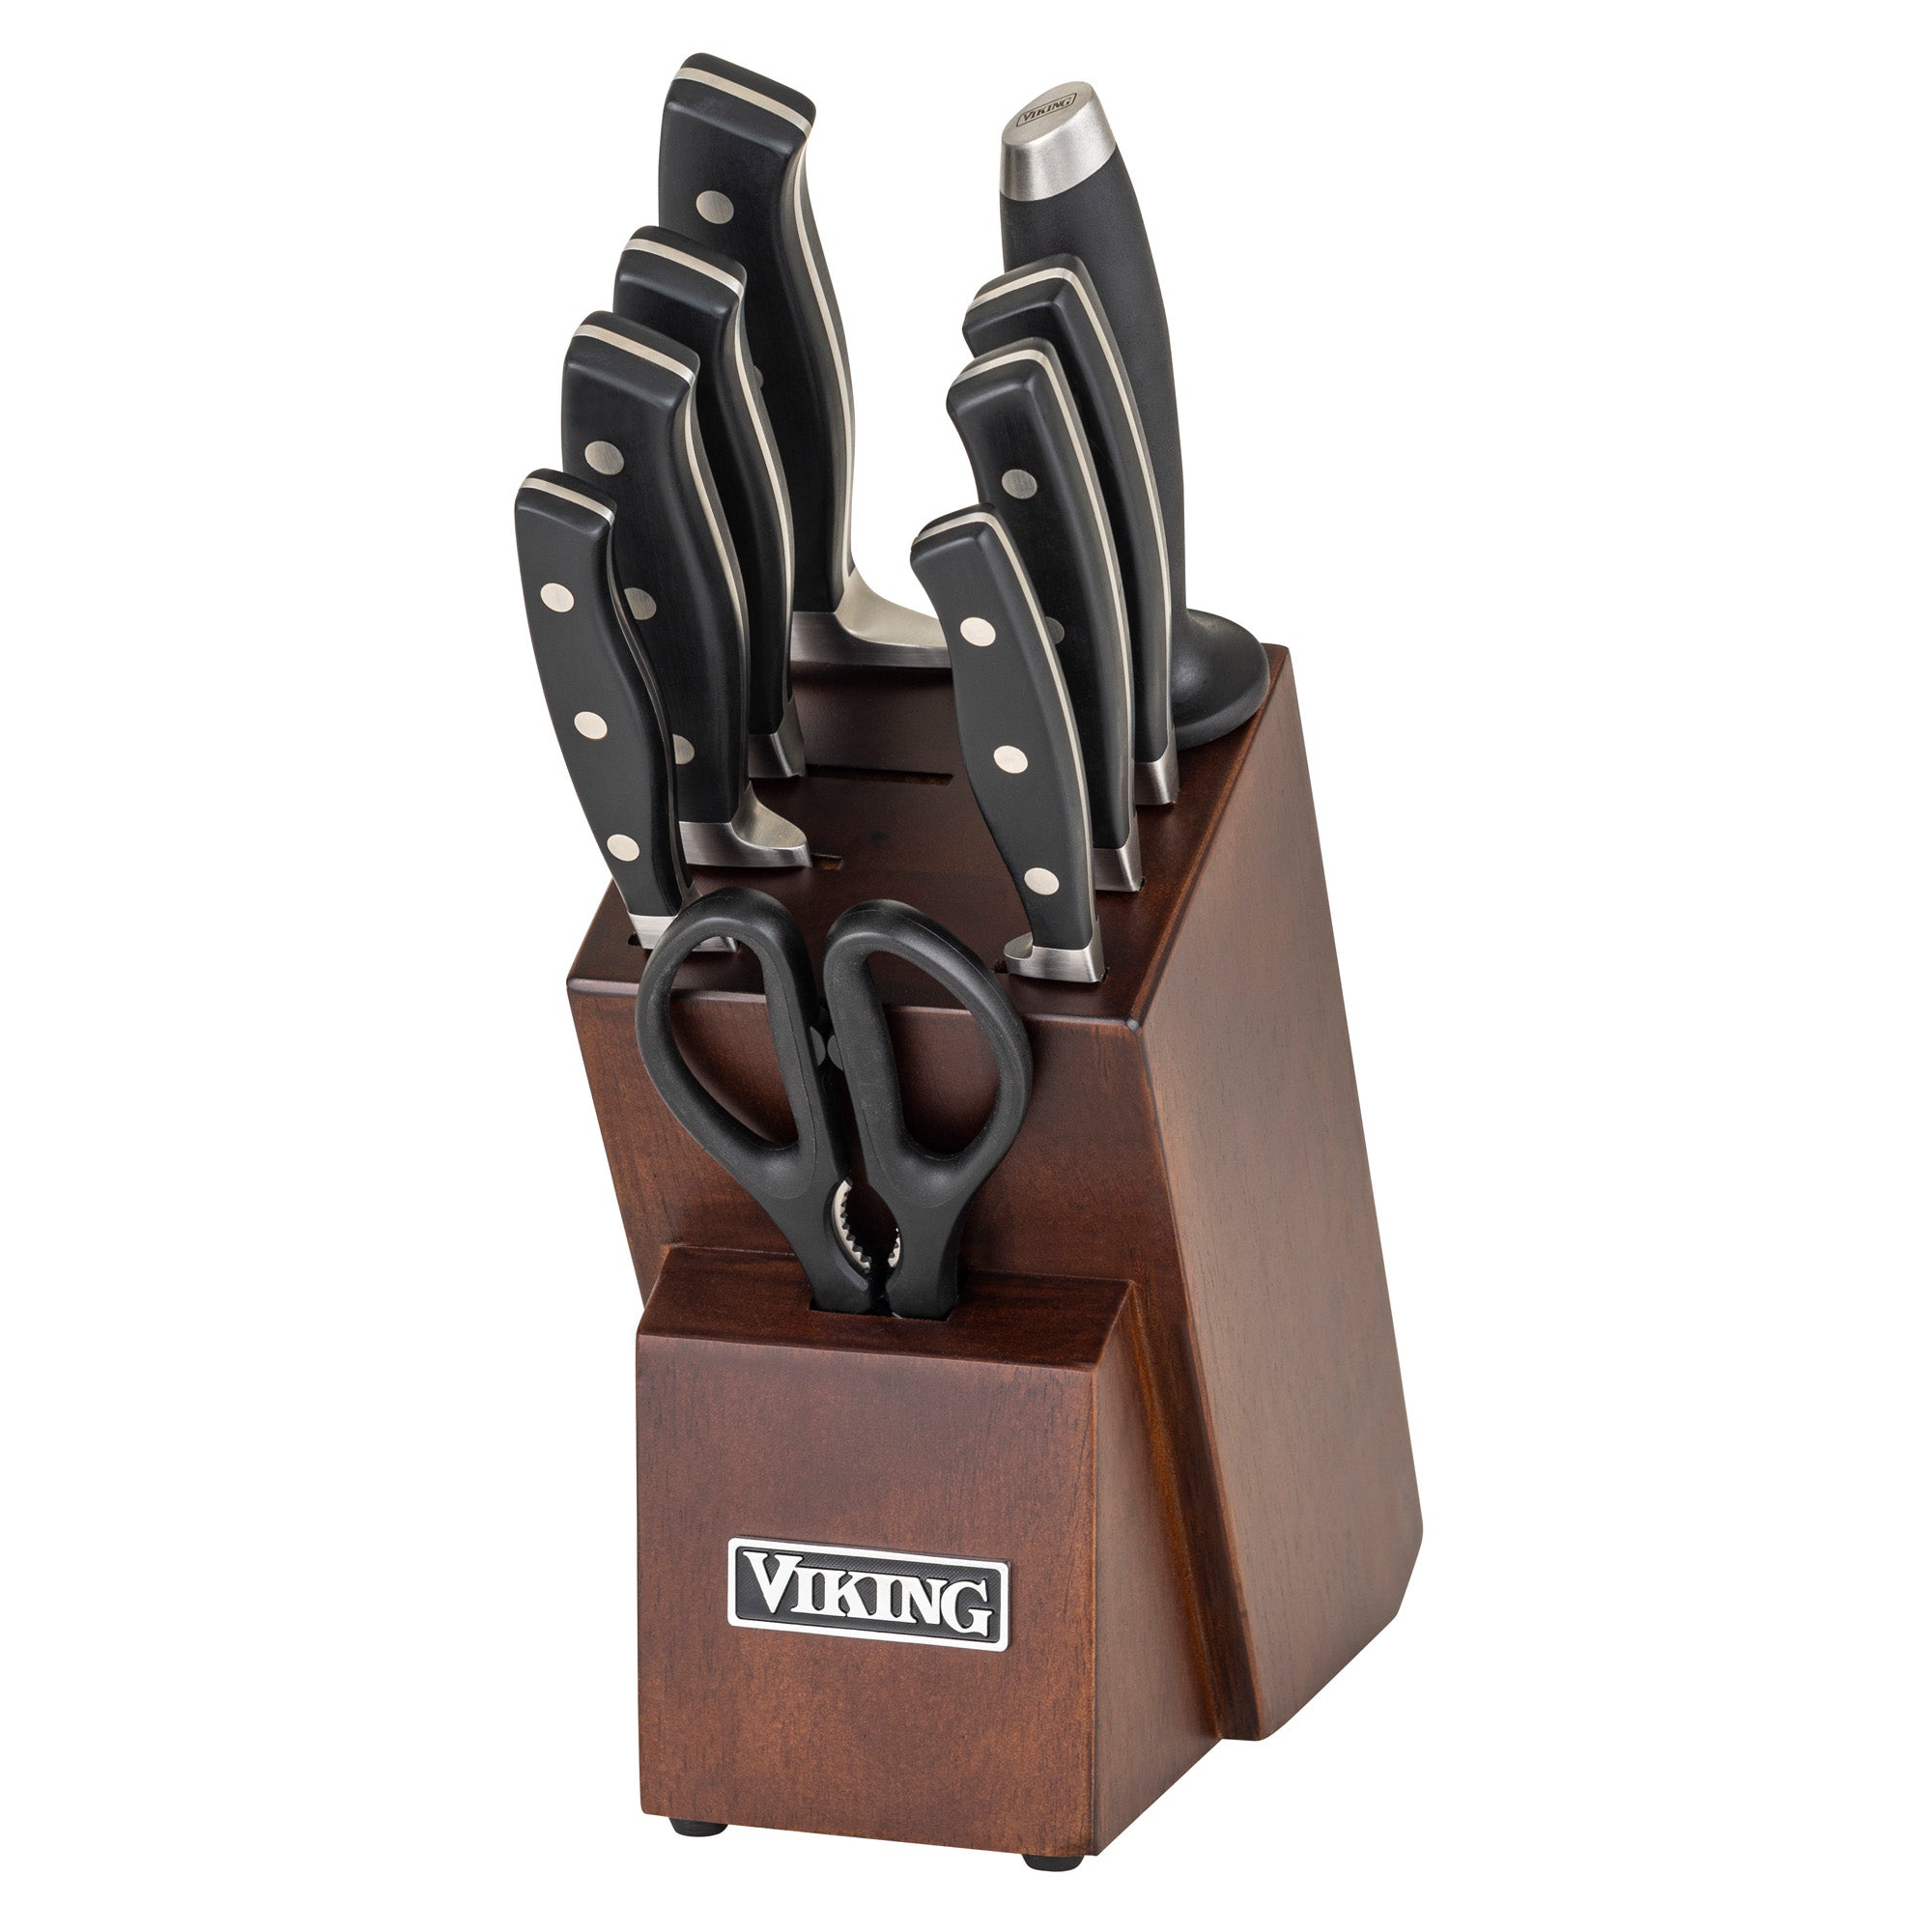 Buy the Set of 9 Chicago Cutlery Knives In Wood Block